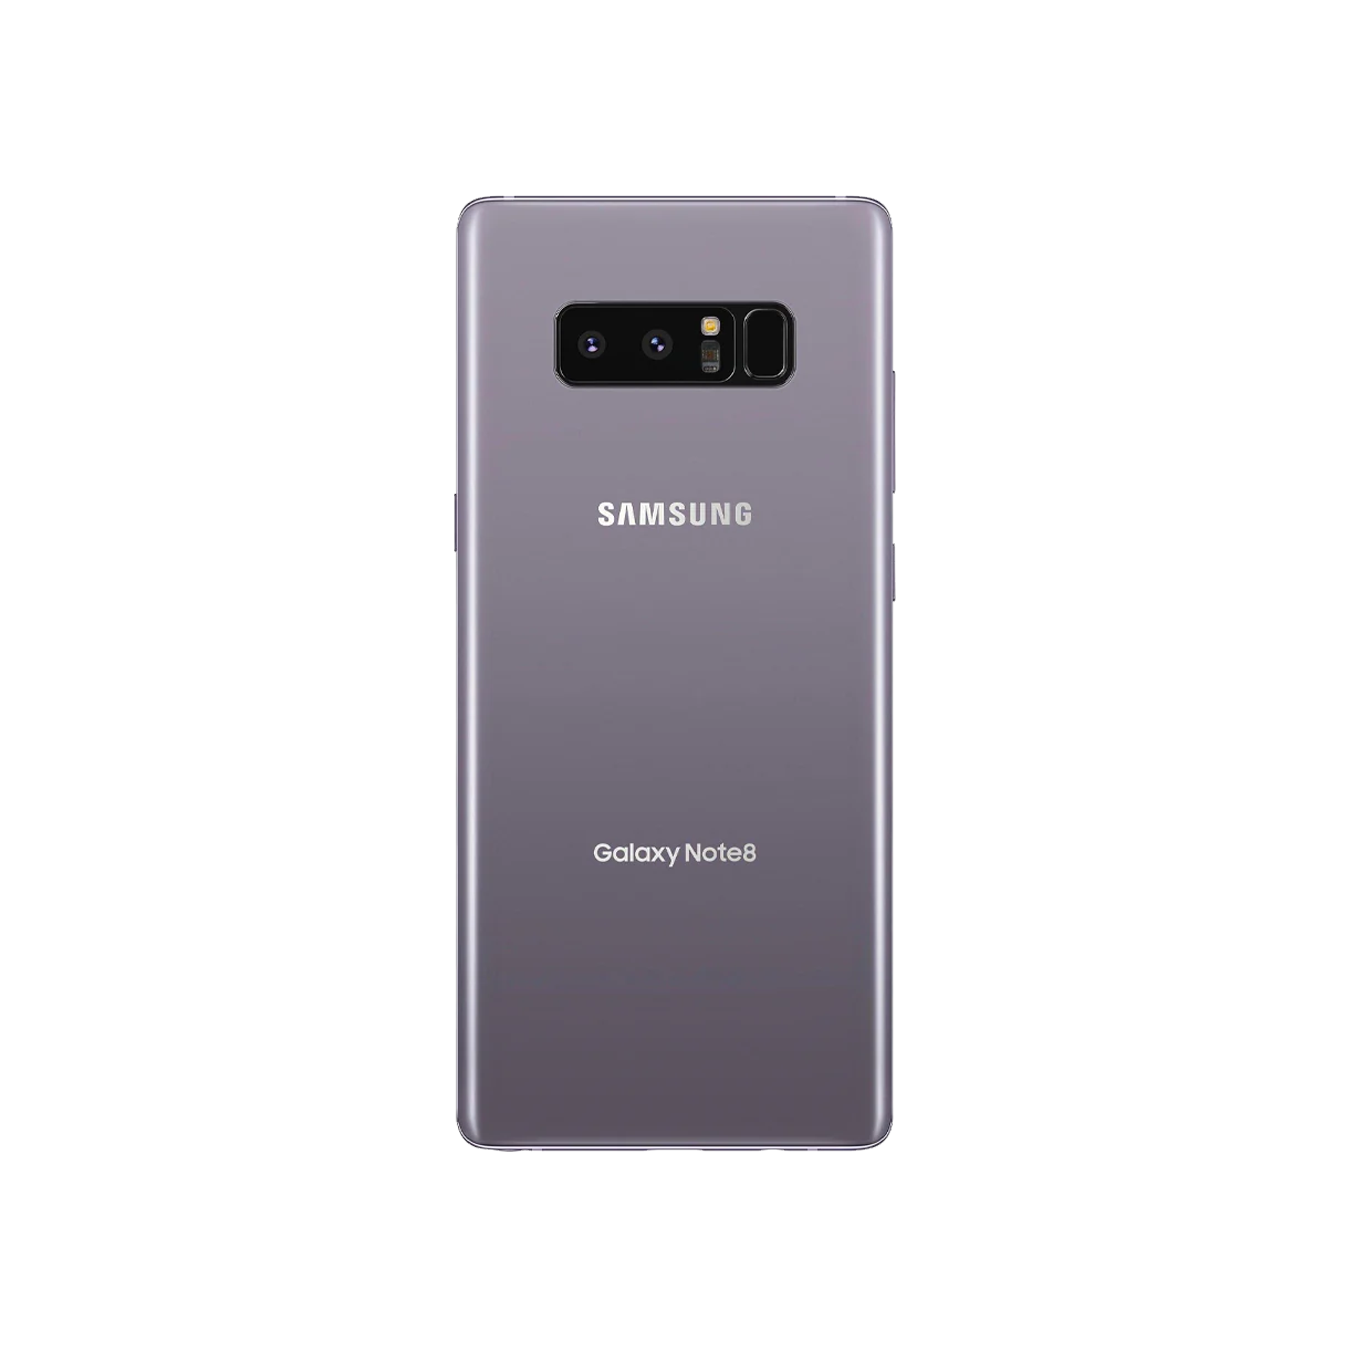 Samsung Galaxy Note8 IMEI repair service to fix bad or blacklisted IMEI, ensuring full functionality and connectivity, available at cleanimei.com